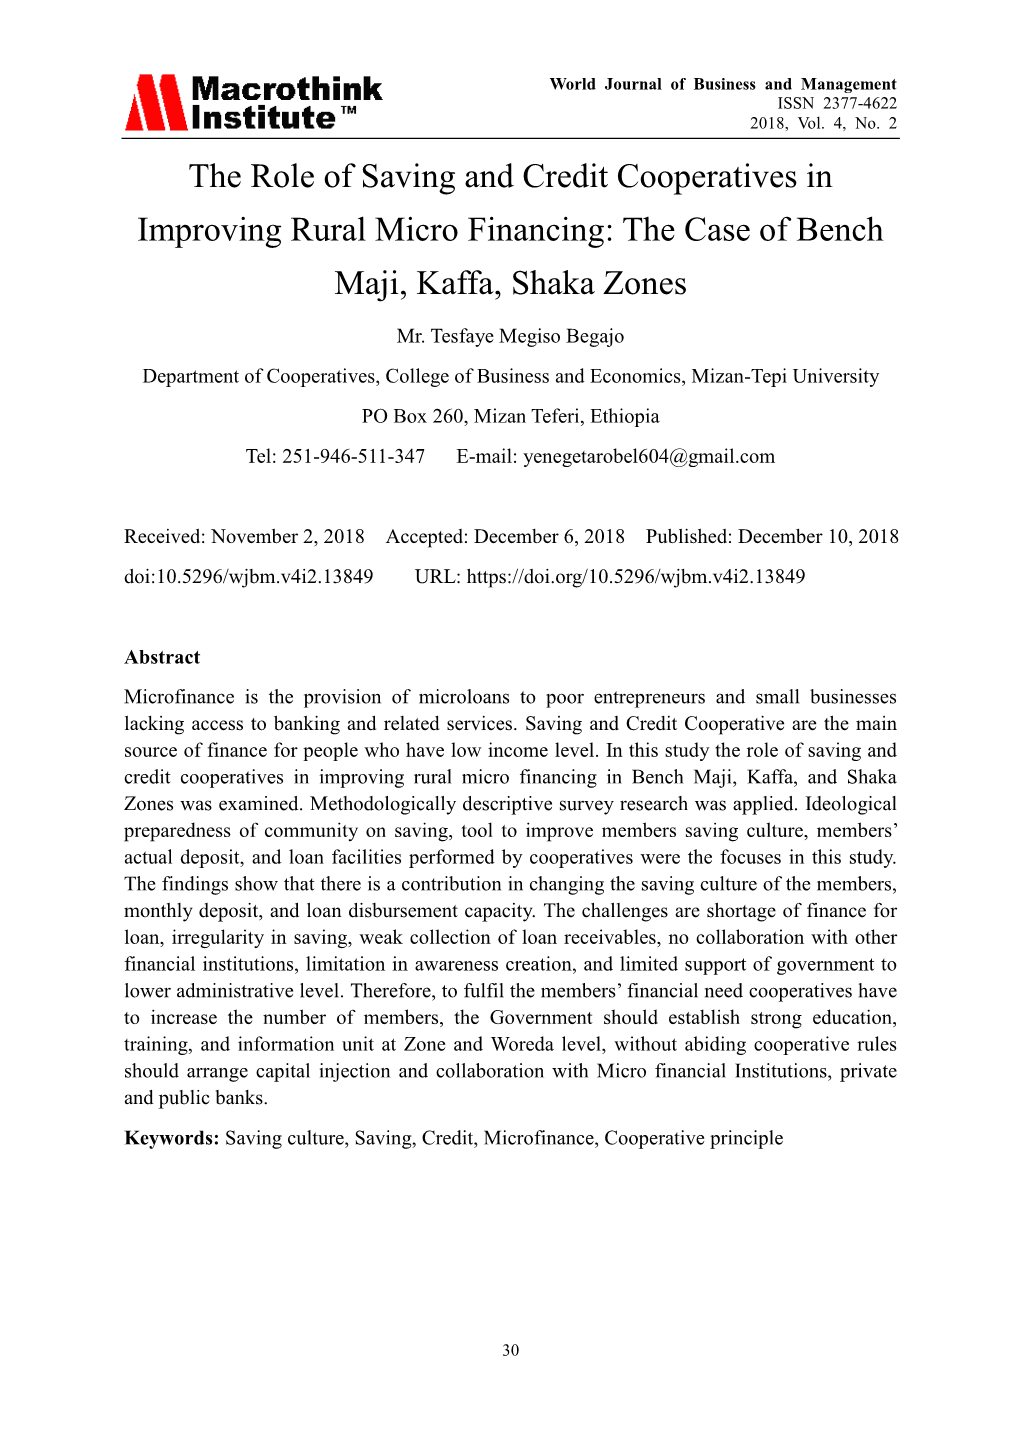 The Role of Saving and Credit Cooperatives in Improving Rural Micro Financing: the Case of Bench Maji, Kaffa, Shaka Zones